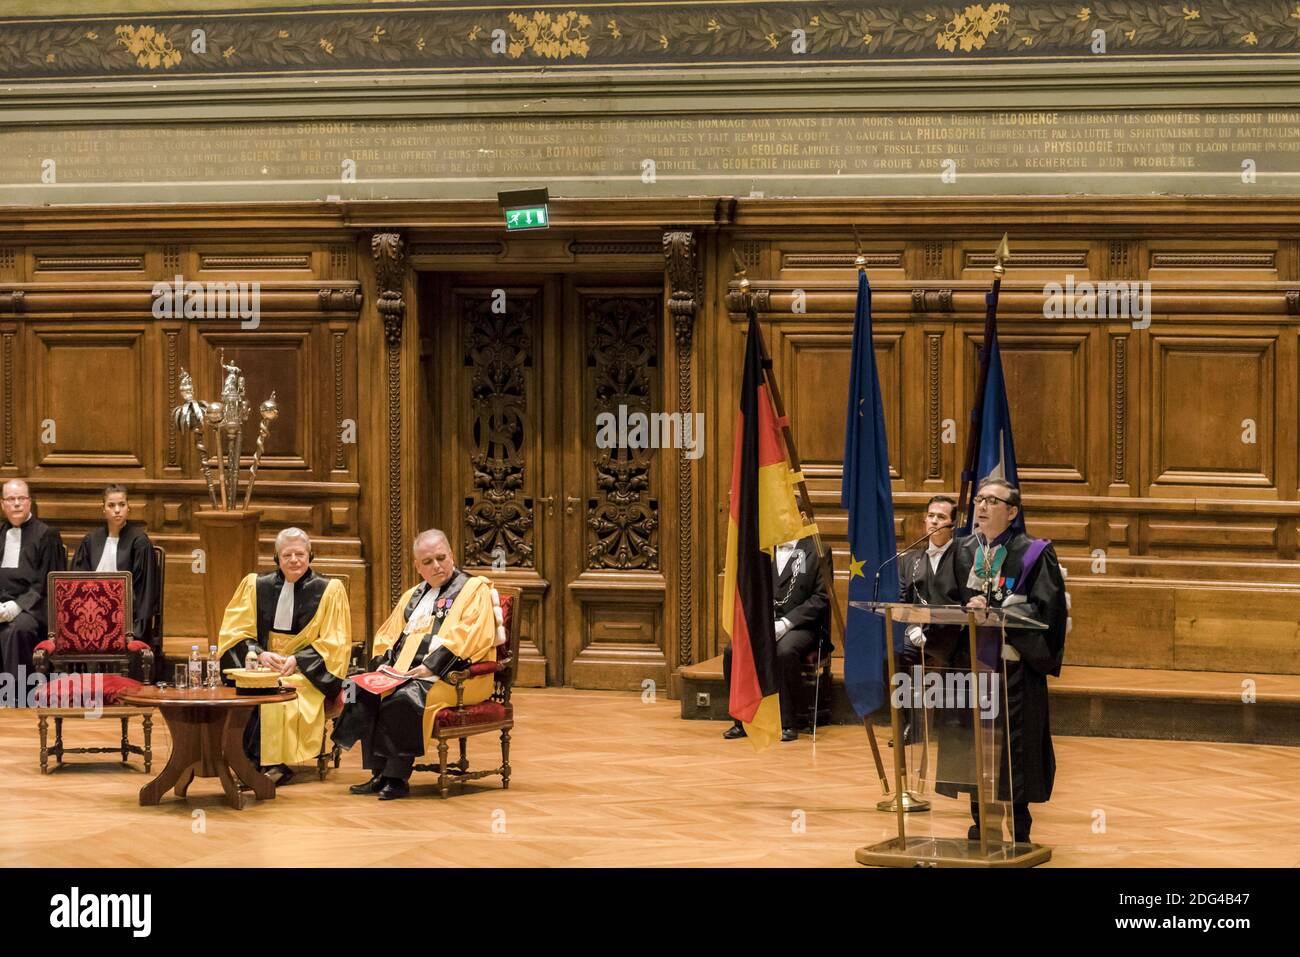 Gilles Pecout, rector of the Ile-de-France academic region, during a ceremony to award the insignia of Doctor Honoris Causa to the President of the Federal Republic of Germany, Joachim Gauck, at the Grand Amphitheater of the Sorbonne within the framework of The invitation of honor of France to the Frankfurt Book Fair 2017, Paris, France, January 26, 2017. Photo by Samuel Boivin / ABACAPRESS.COM Stock Photo